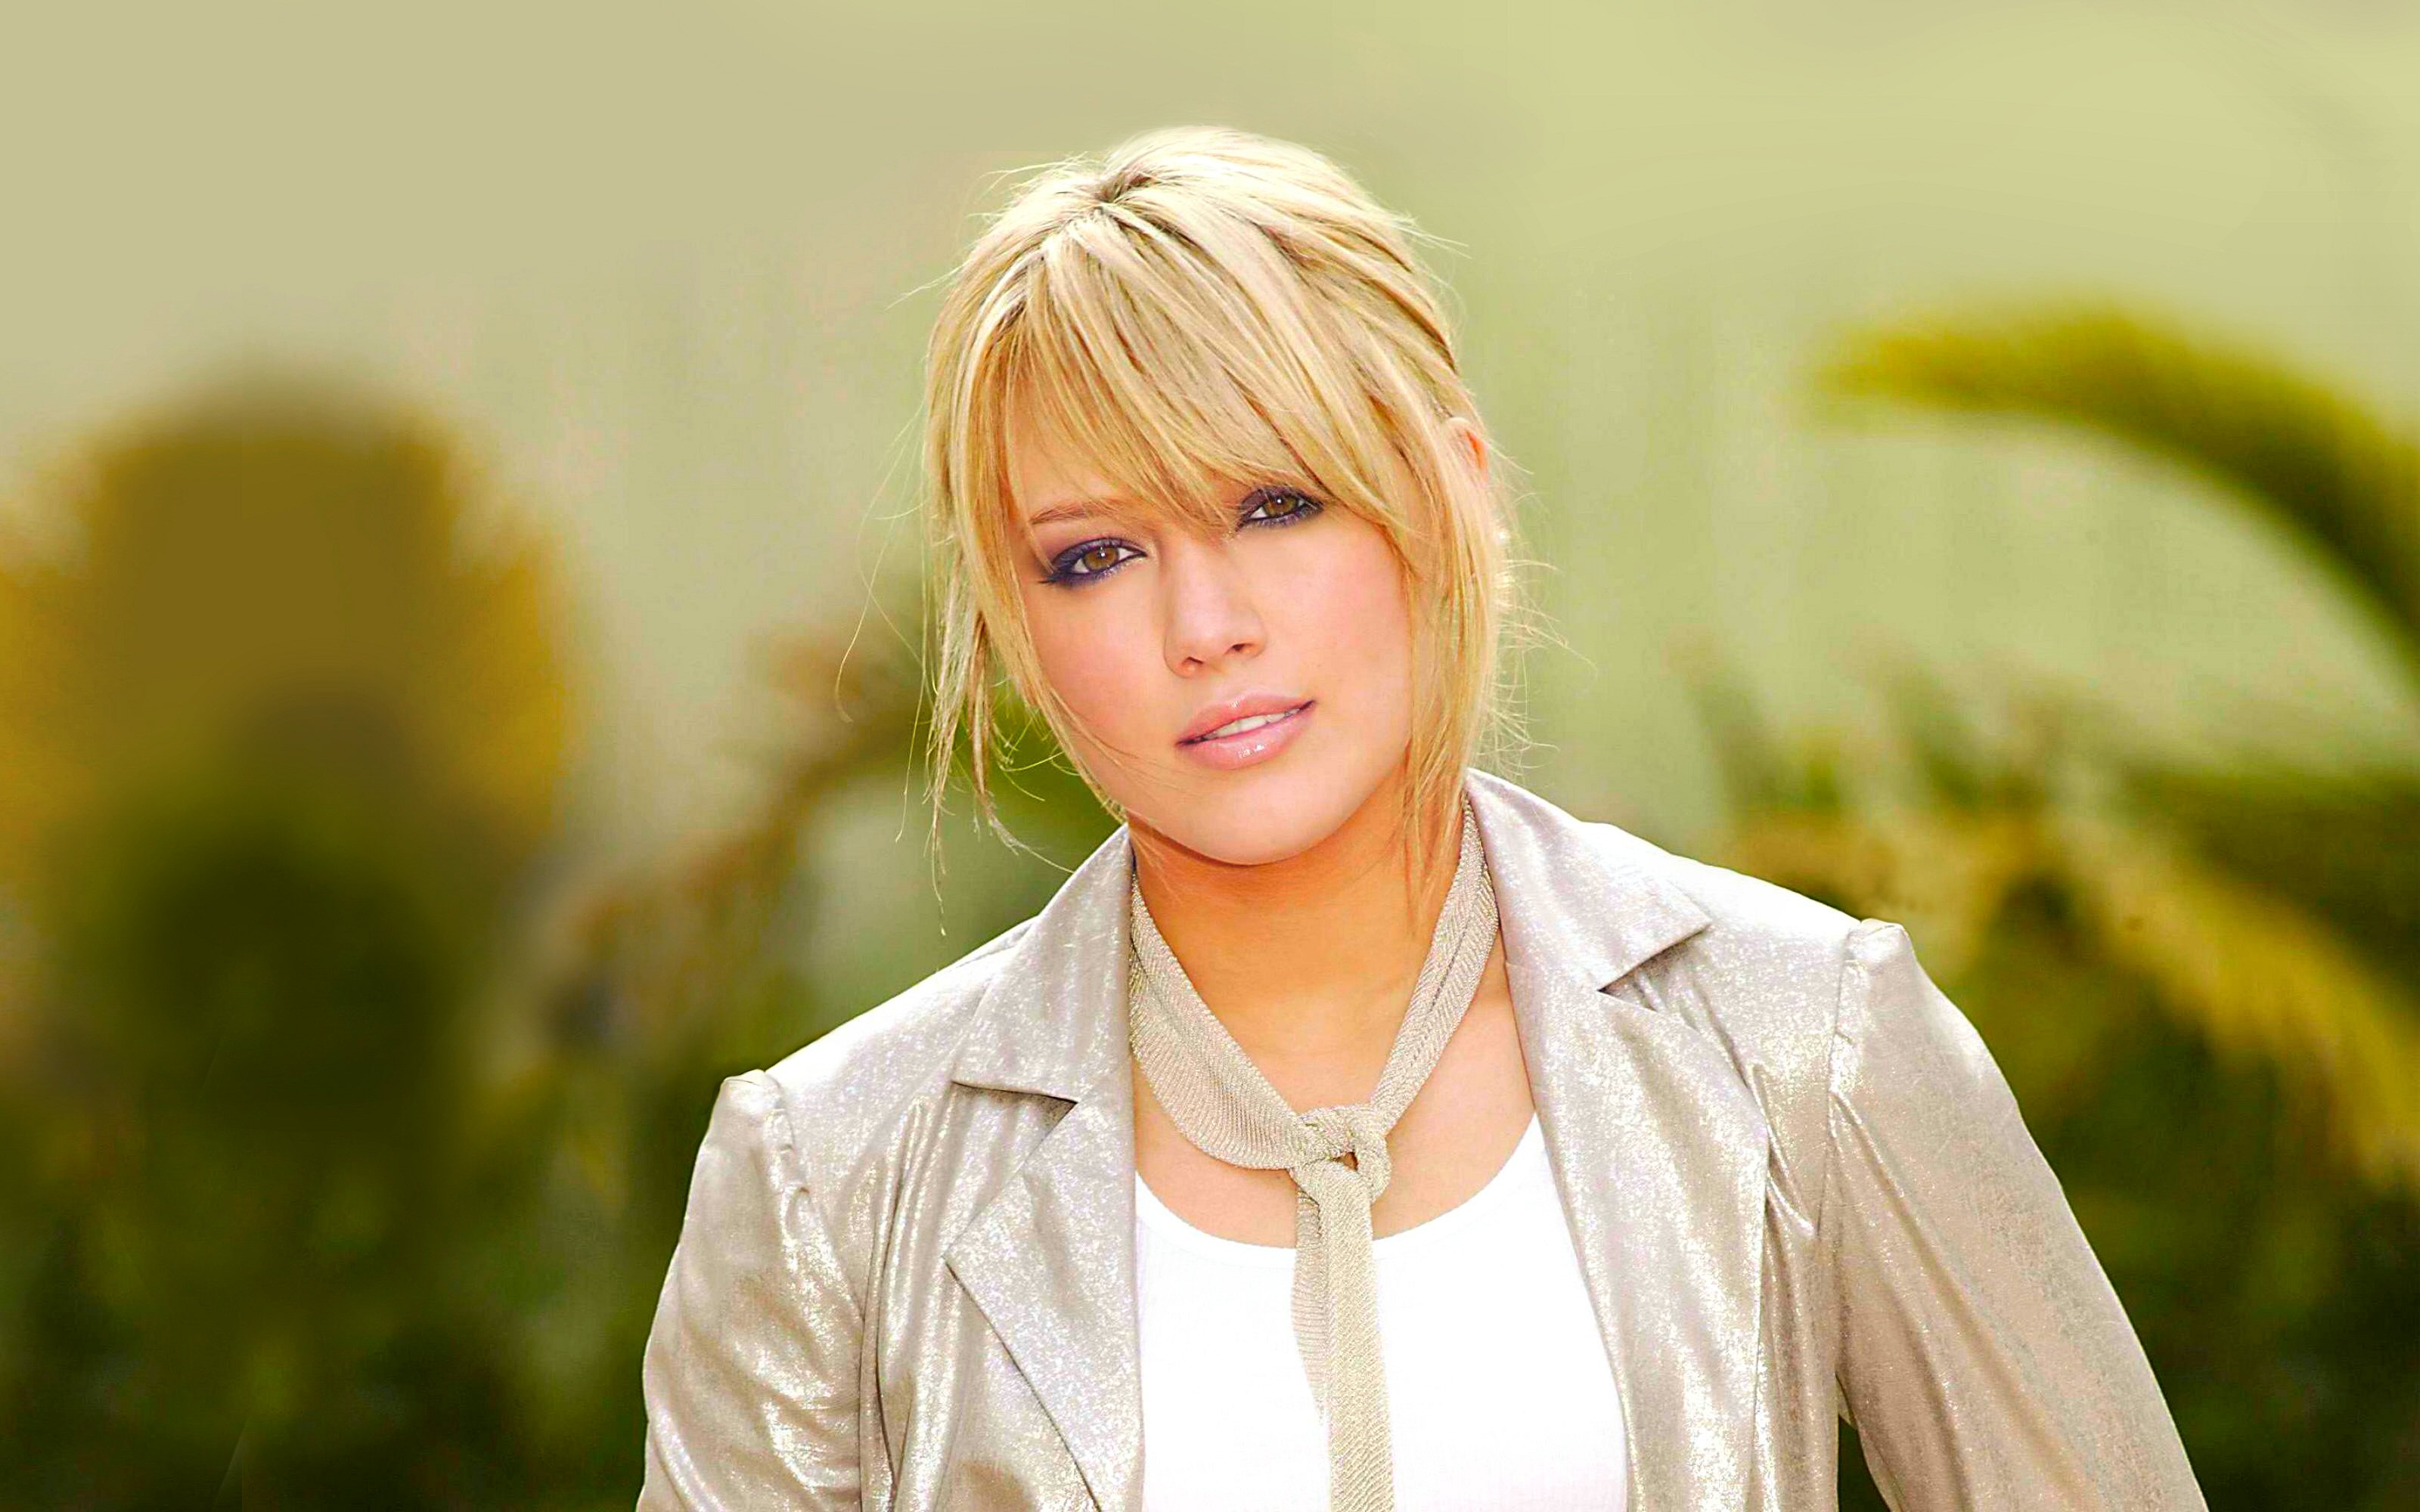 Hilry Duff Celebrity Upskirt No Panties - Hilary Duff wallpapers for desktop, download free Hilary Duff pictures and  backgrounds for PC | mob.org